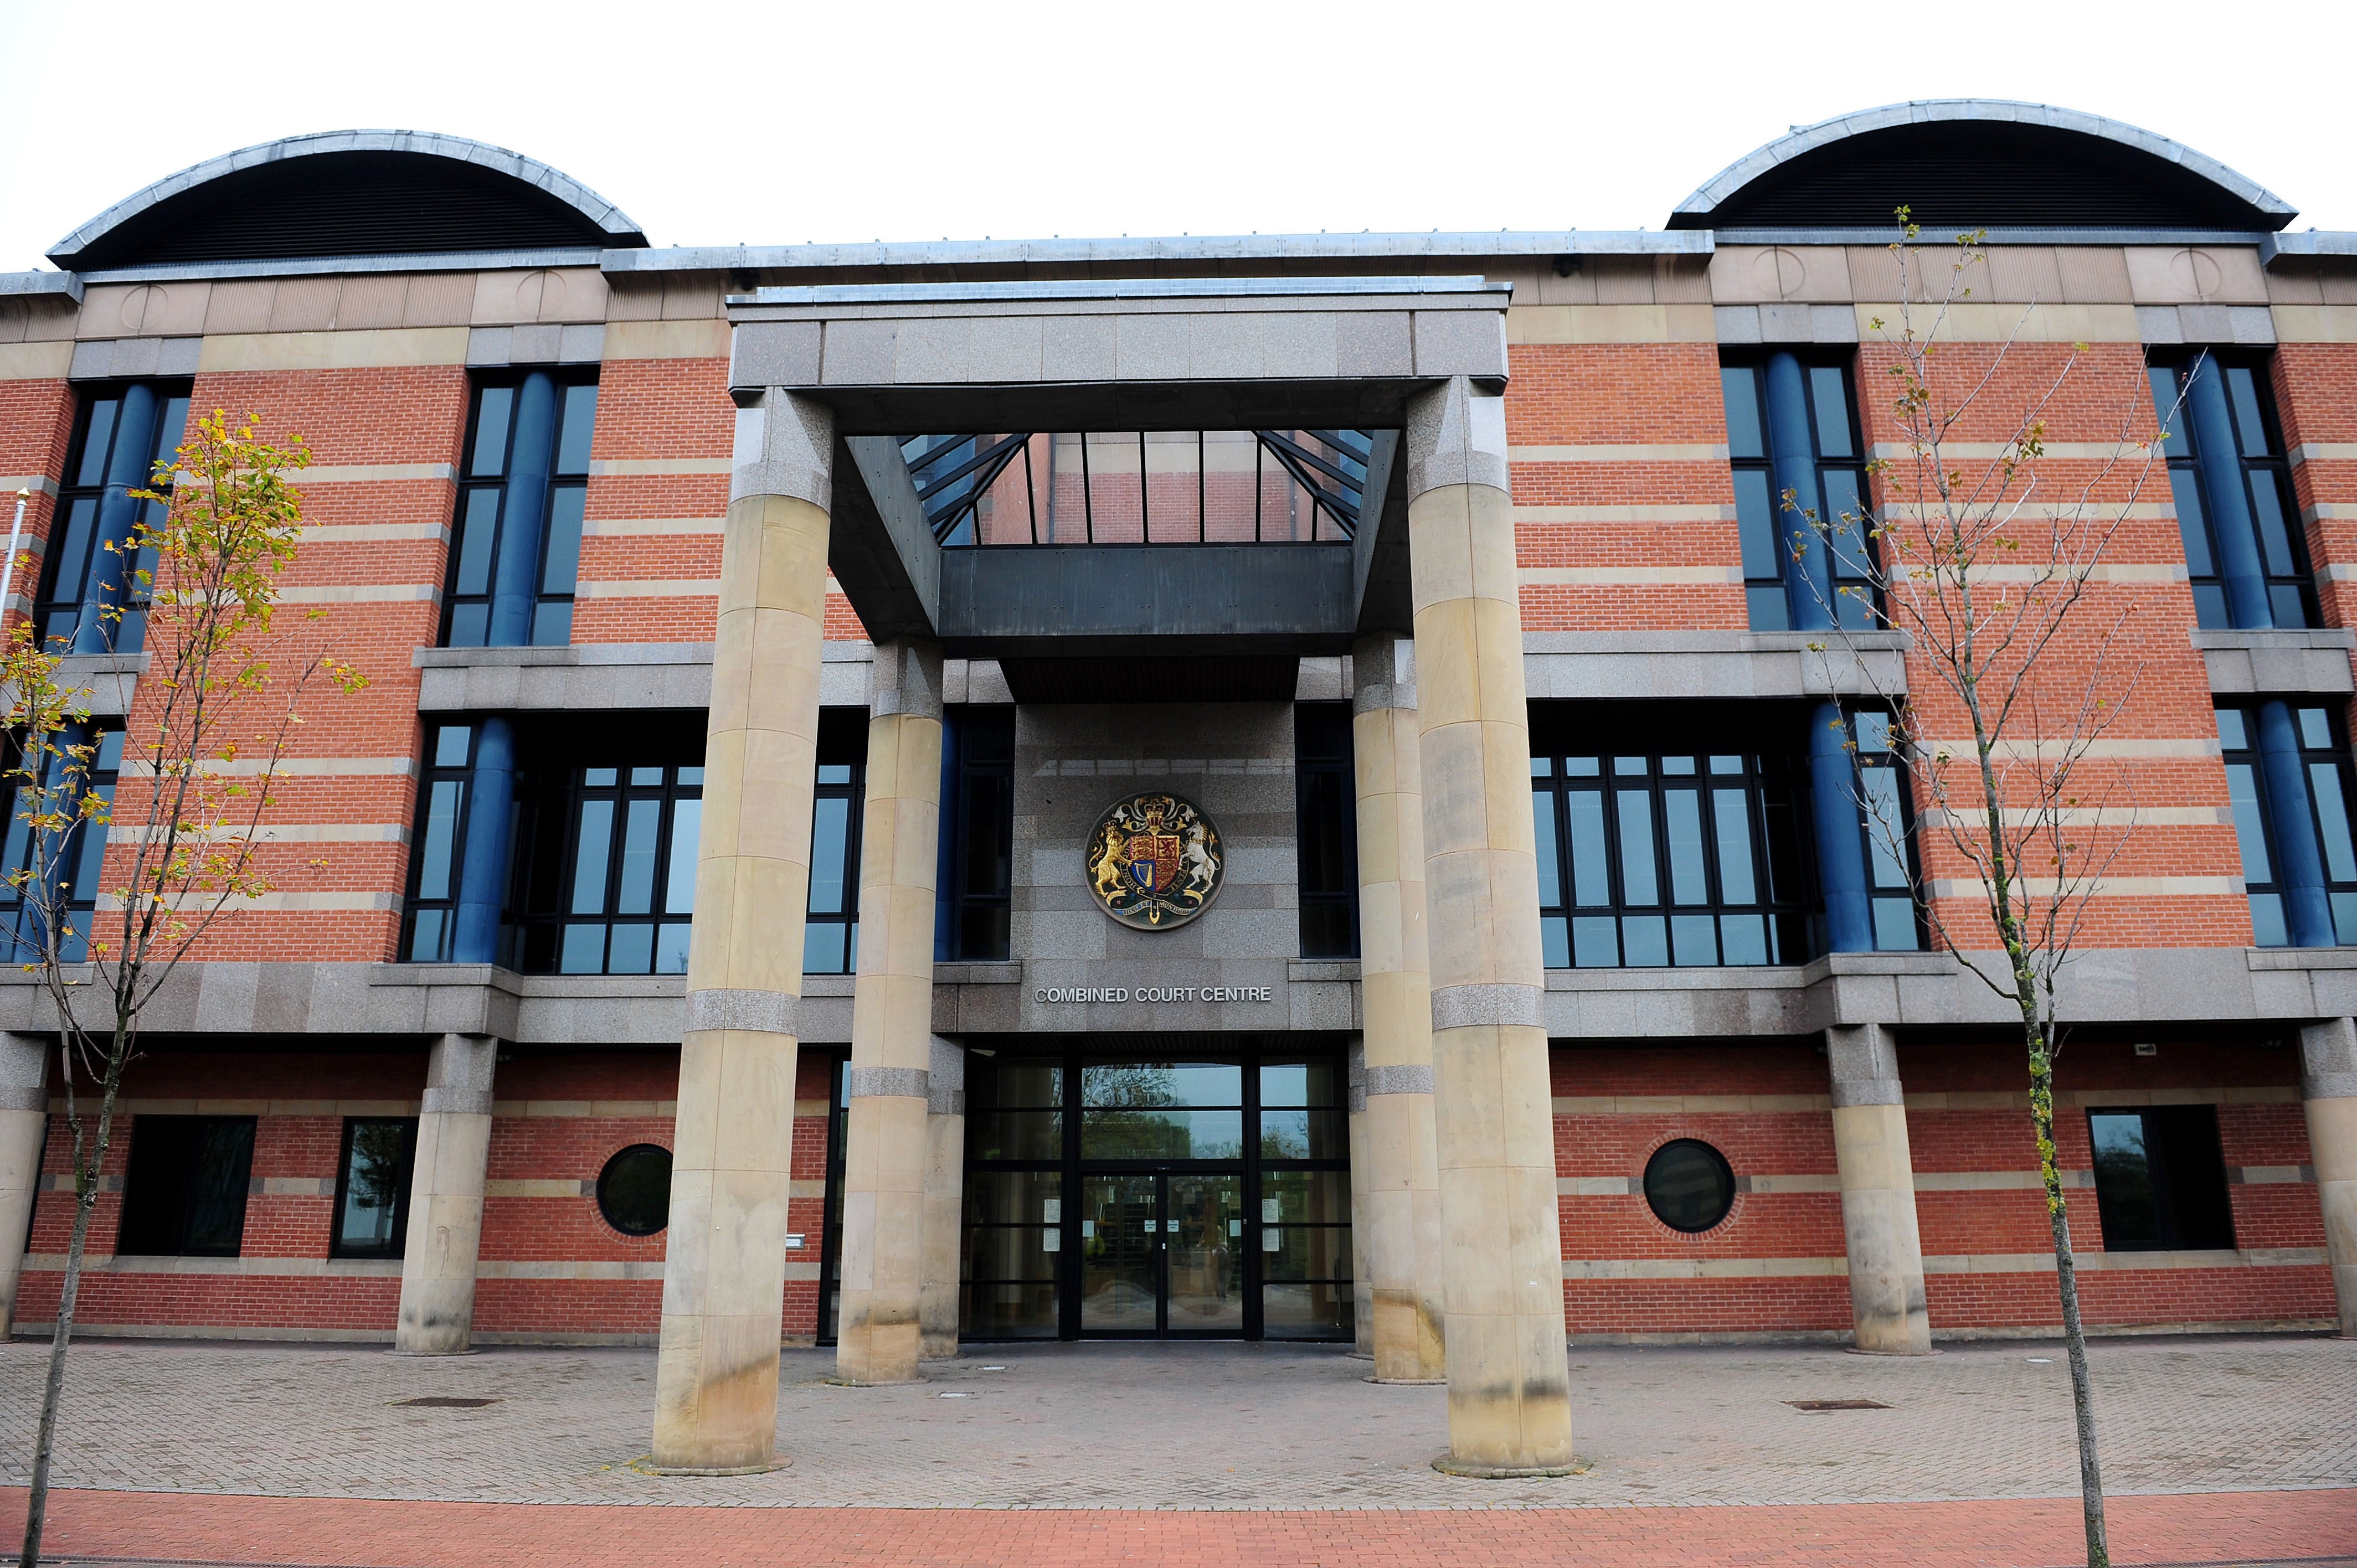 The trial is taking place at Teesside Crown Court